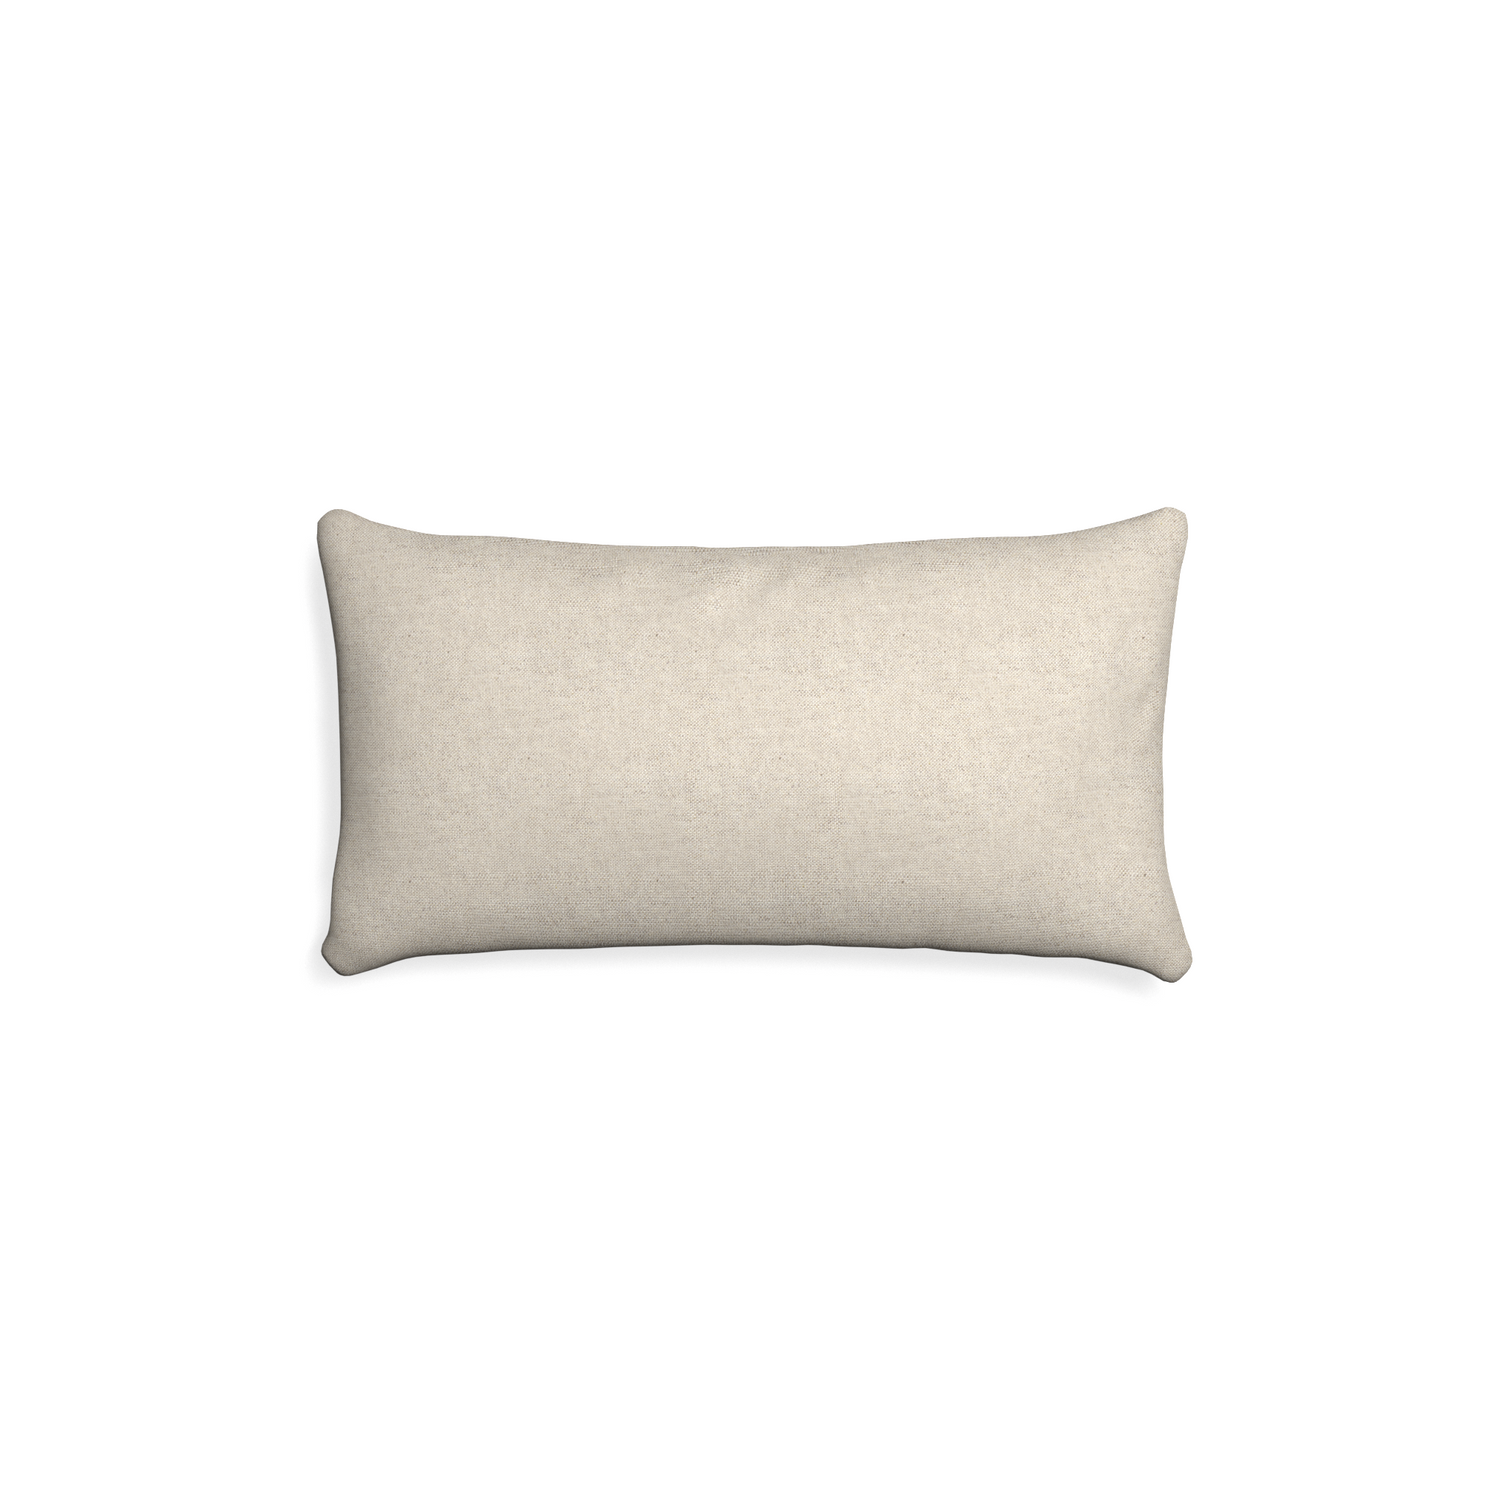 Petite-lumbar oat custom light brownpillow with none on white background